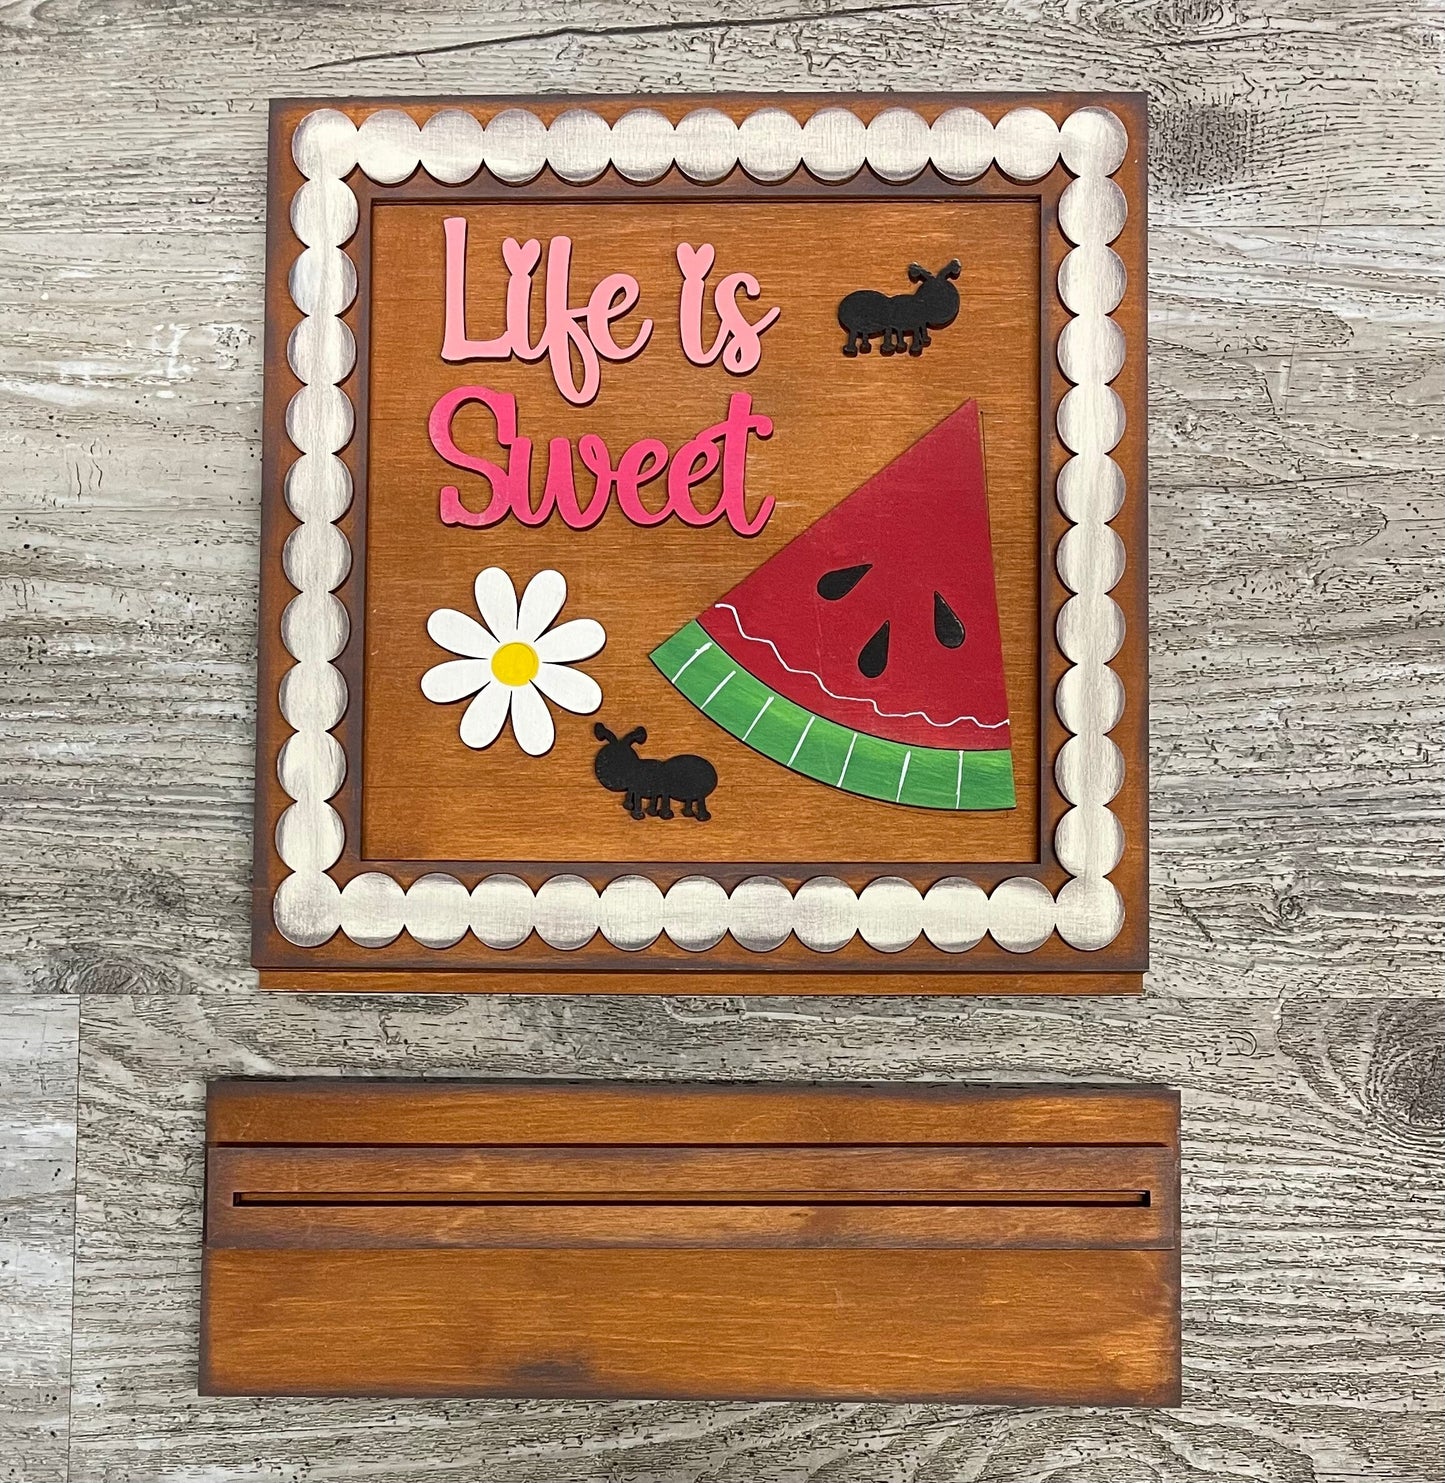 Unpainted Changeable Frame with the removable Life is Sweet June Everyday piece ready for you to paint